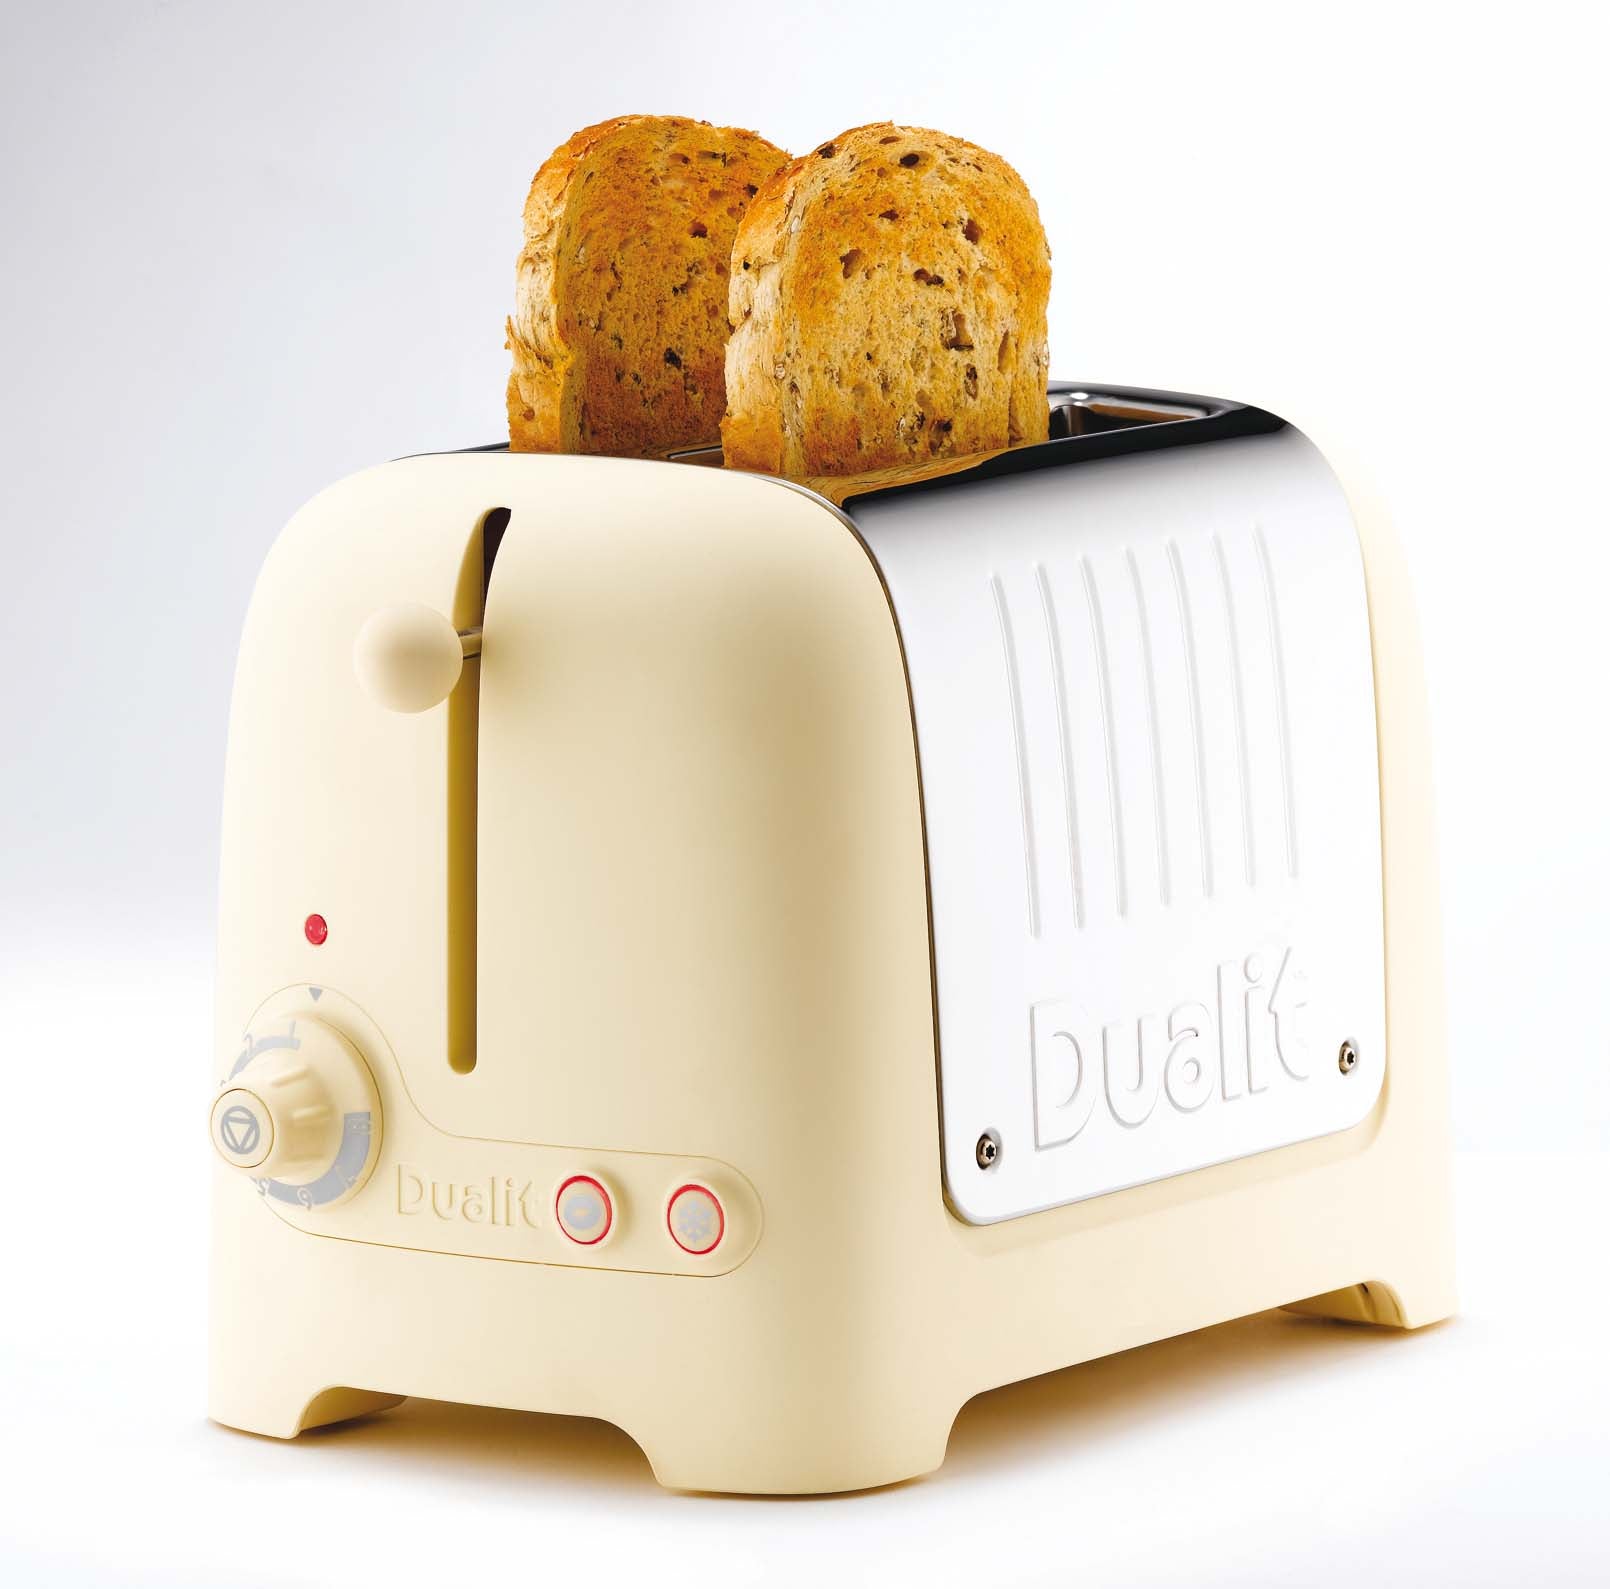 Peek & Pop with the enhanced Lite toaster from Dualit